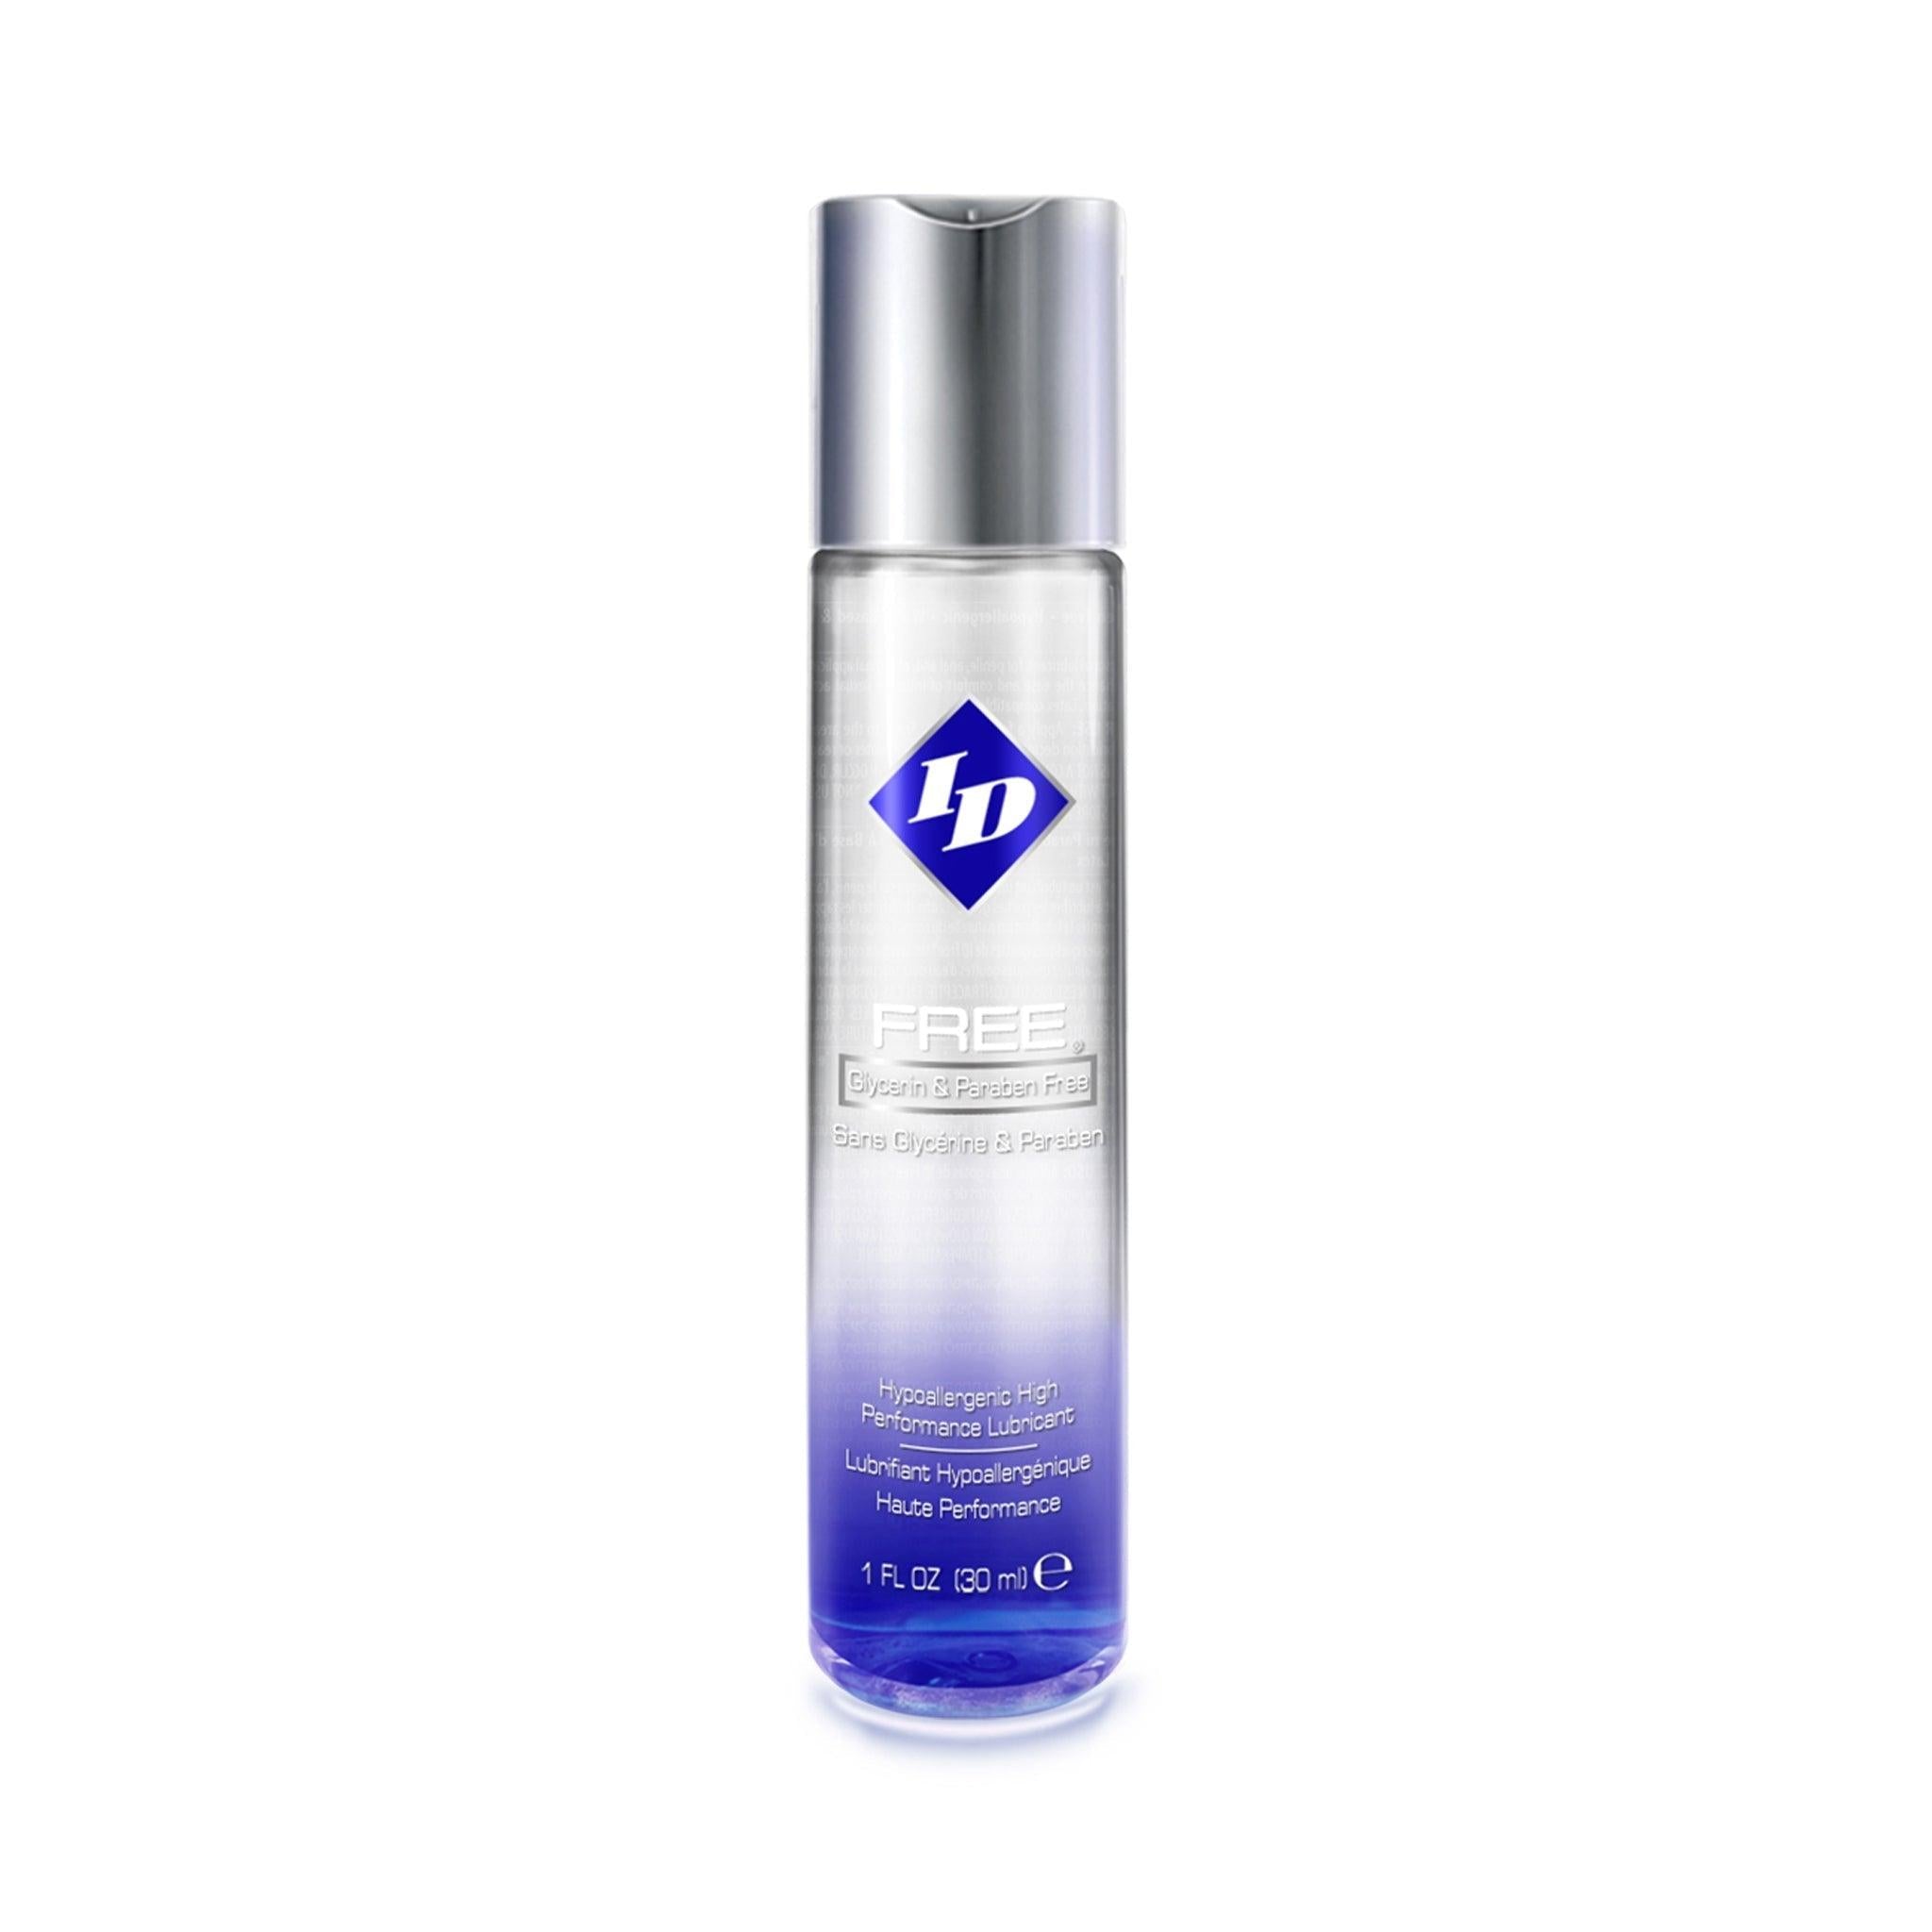 ID Free - Glycerin & Paraben Free, Hypoallergenic Water-Based Lubricant - CheapLubes.com